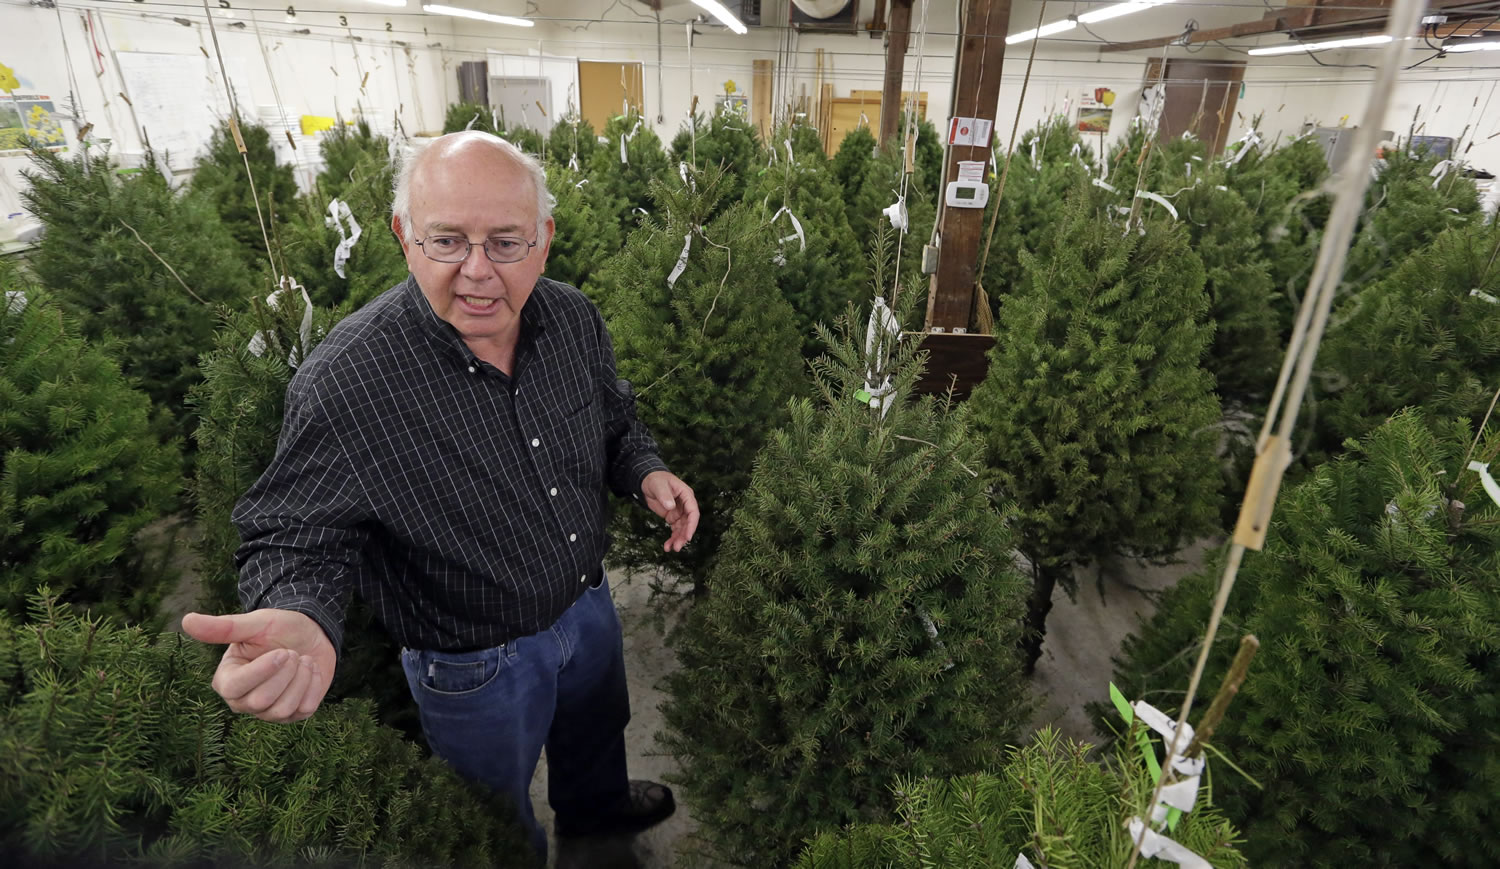 Gary Chastagner, a Washington State University plant pathology professor, stands Tuesday among trimmed Douglas fir trees suspended in a temperature and humidity-controlled room at a school research facility in Puyallup. Consumers consistently cite messiness as one of the most common reasons they don't have a real tree, says the National Christmas Tree Association.